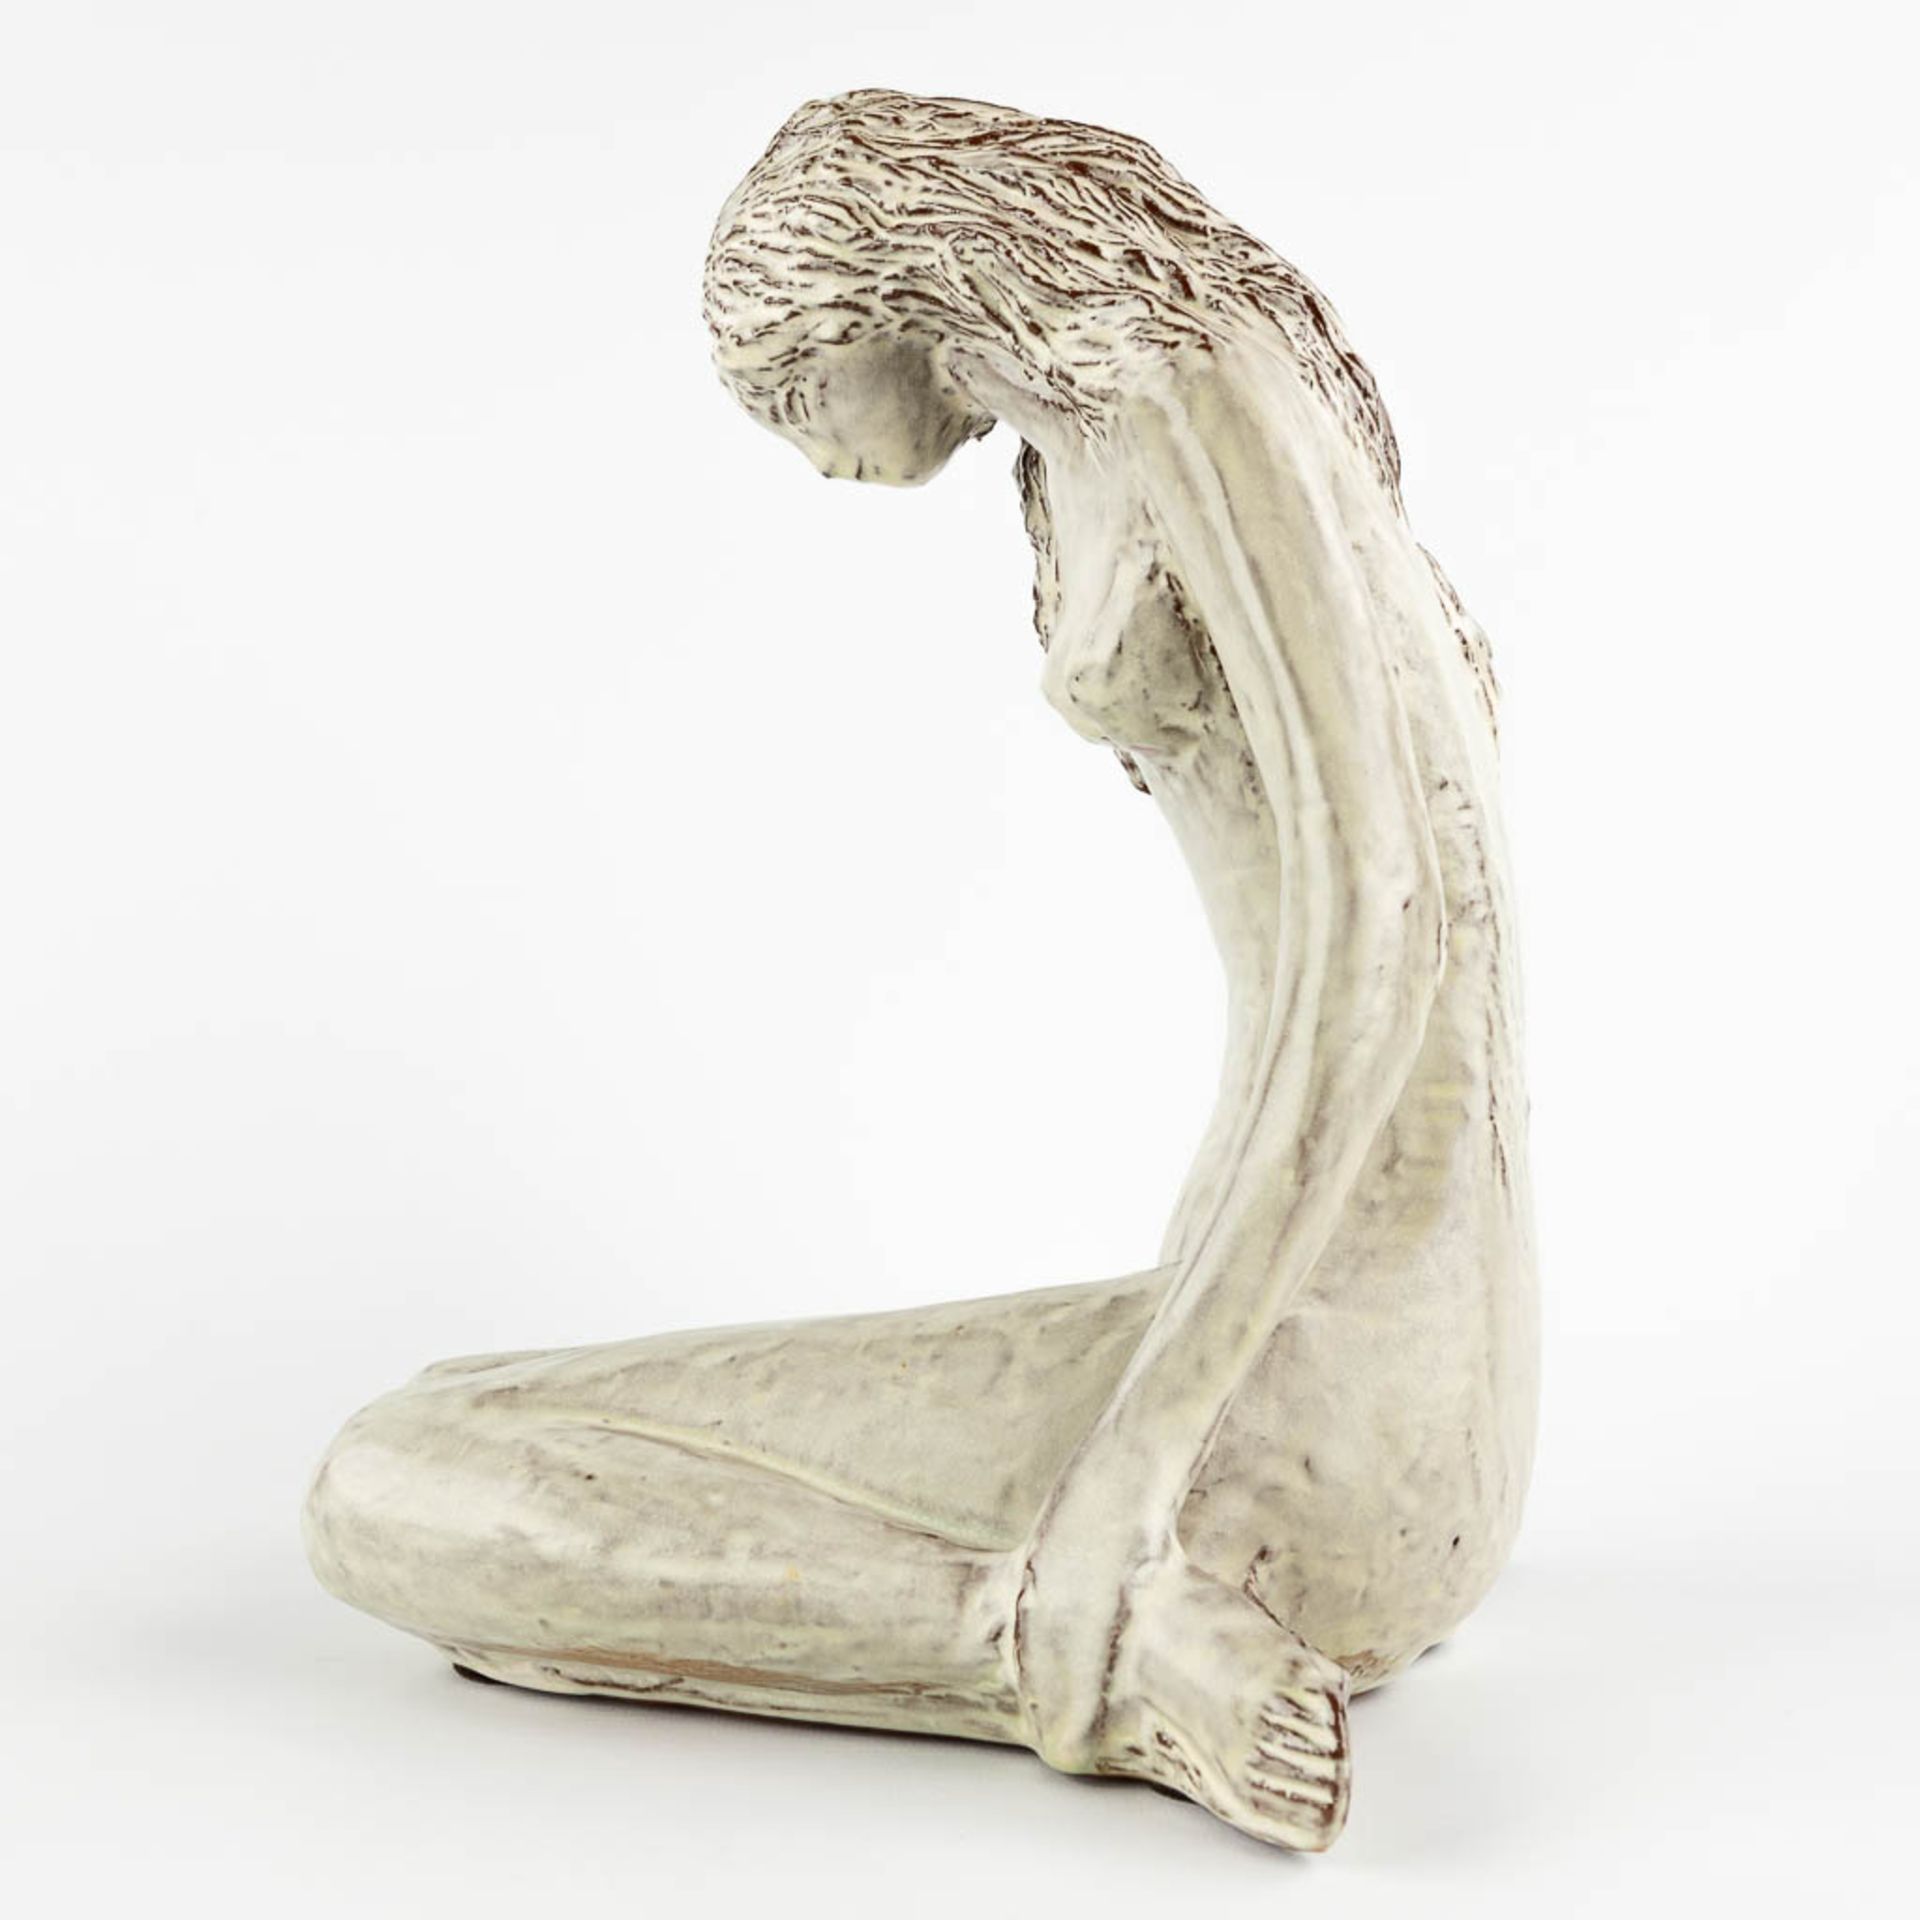 Elie VAN DAMME (1928) 'Seated Lady' for Amphora. (D:25 x W:24 x H:33 cm) - Image 4 of 11